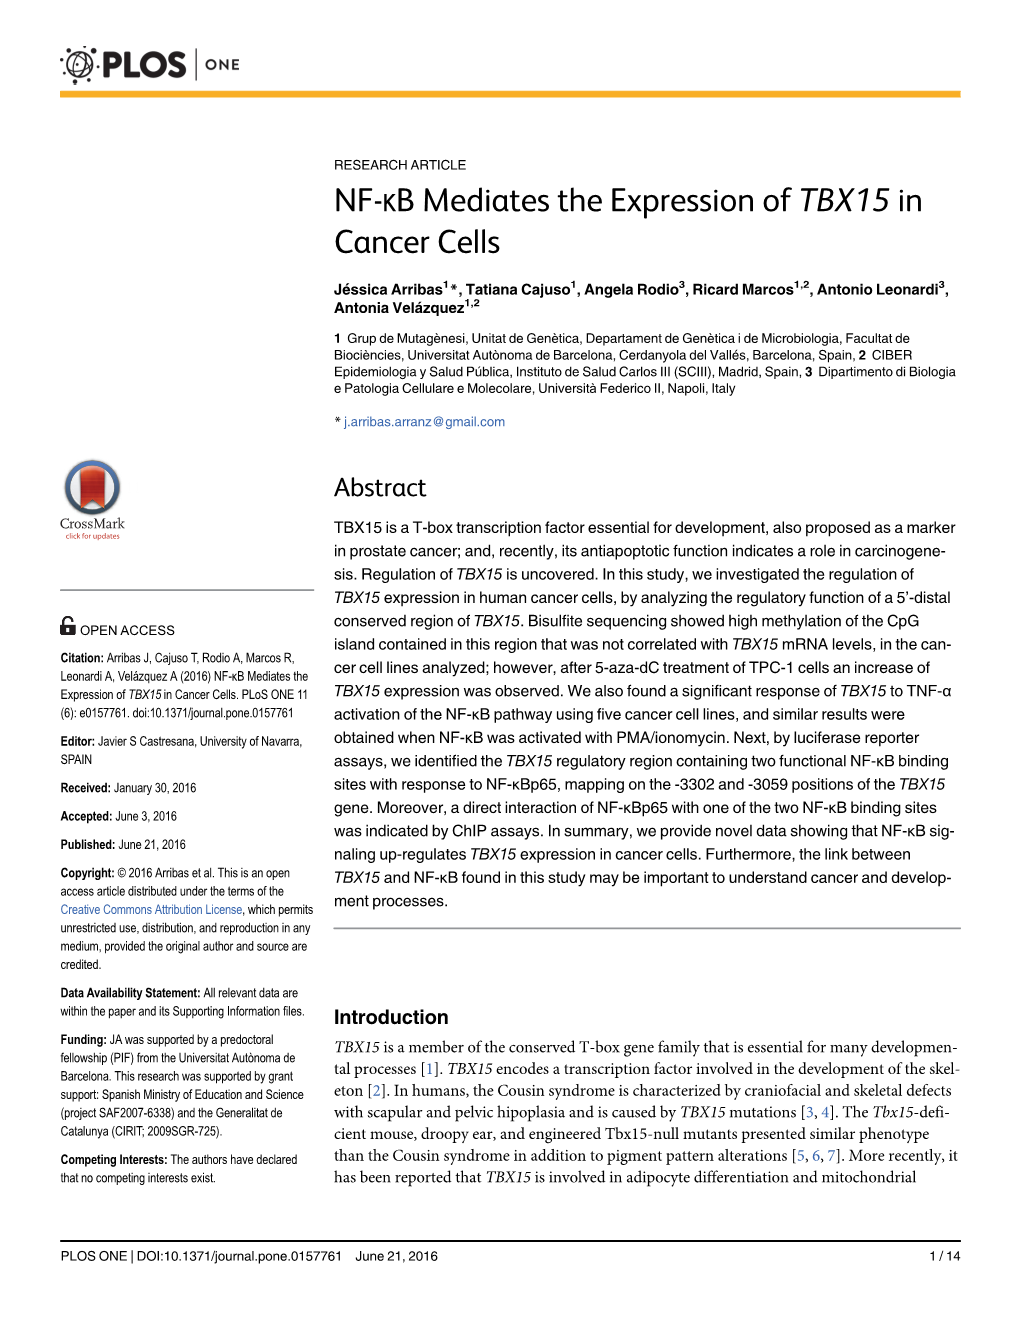 NF-Κb Mediates the Expression of TBX15 in Cancer Cells